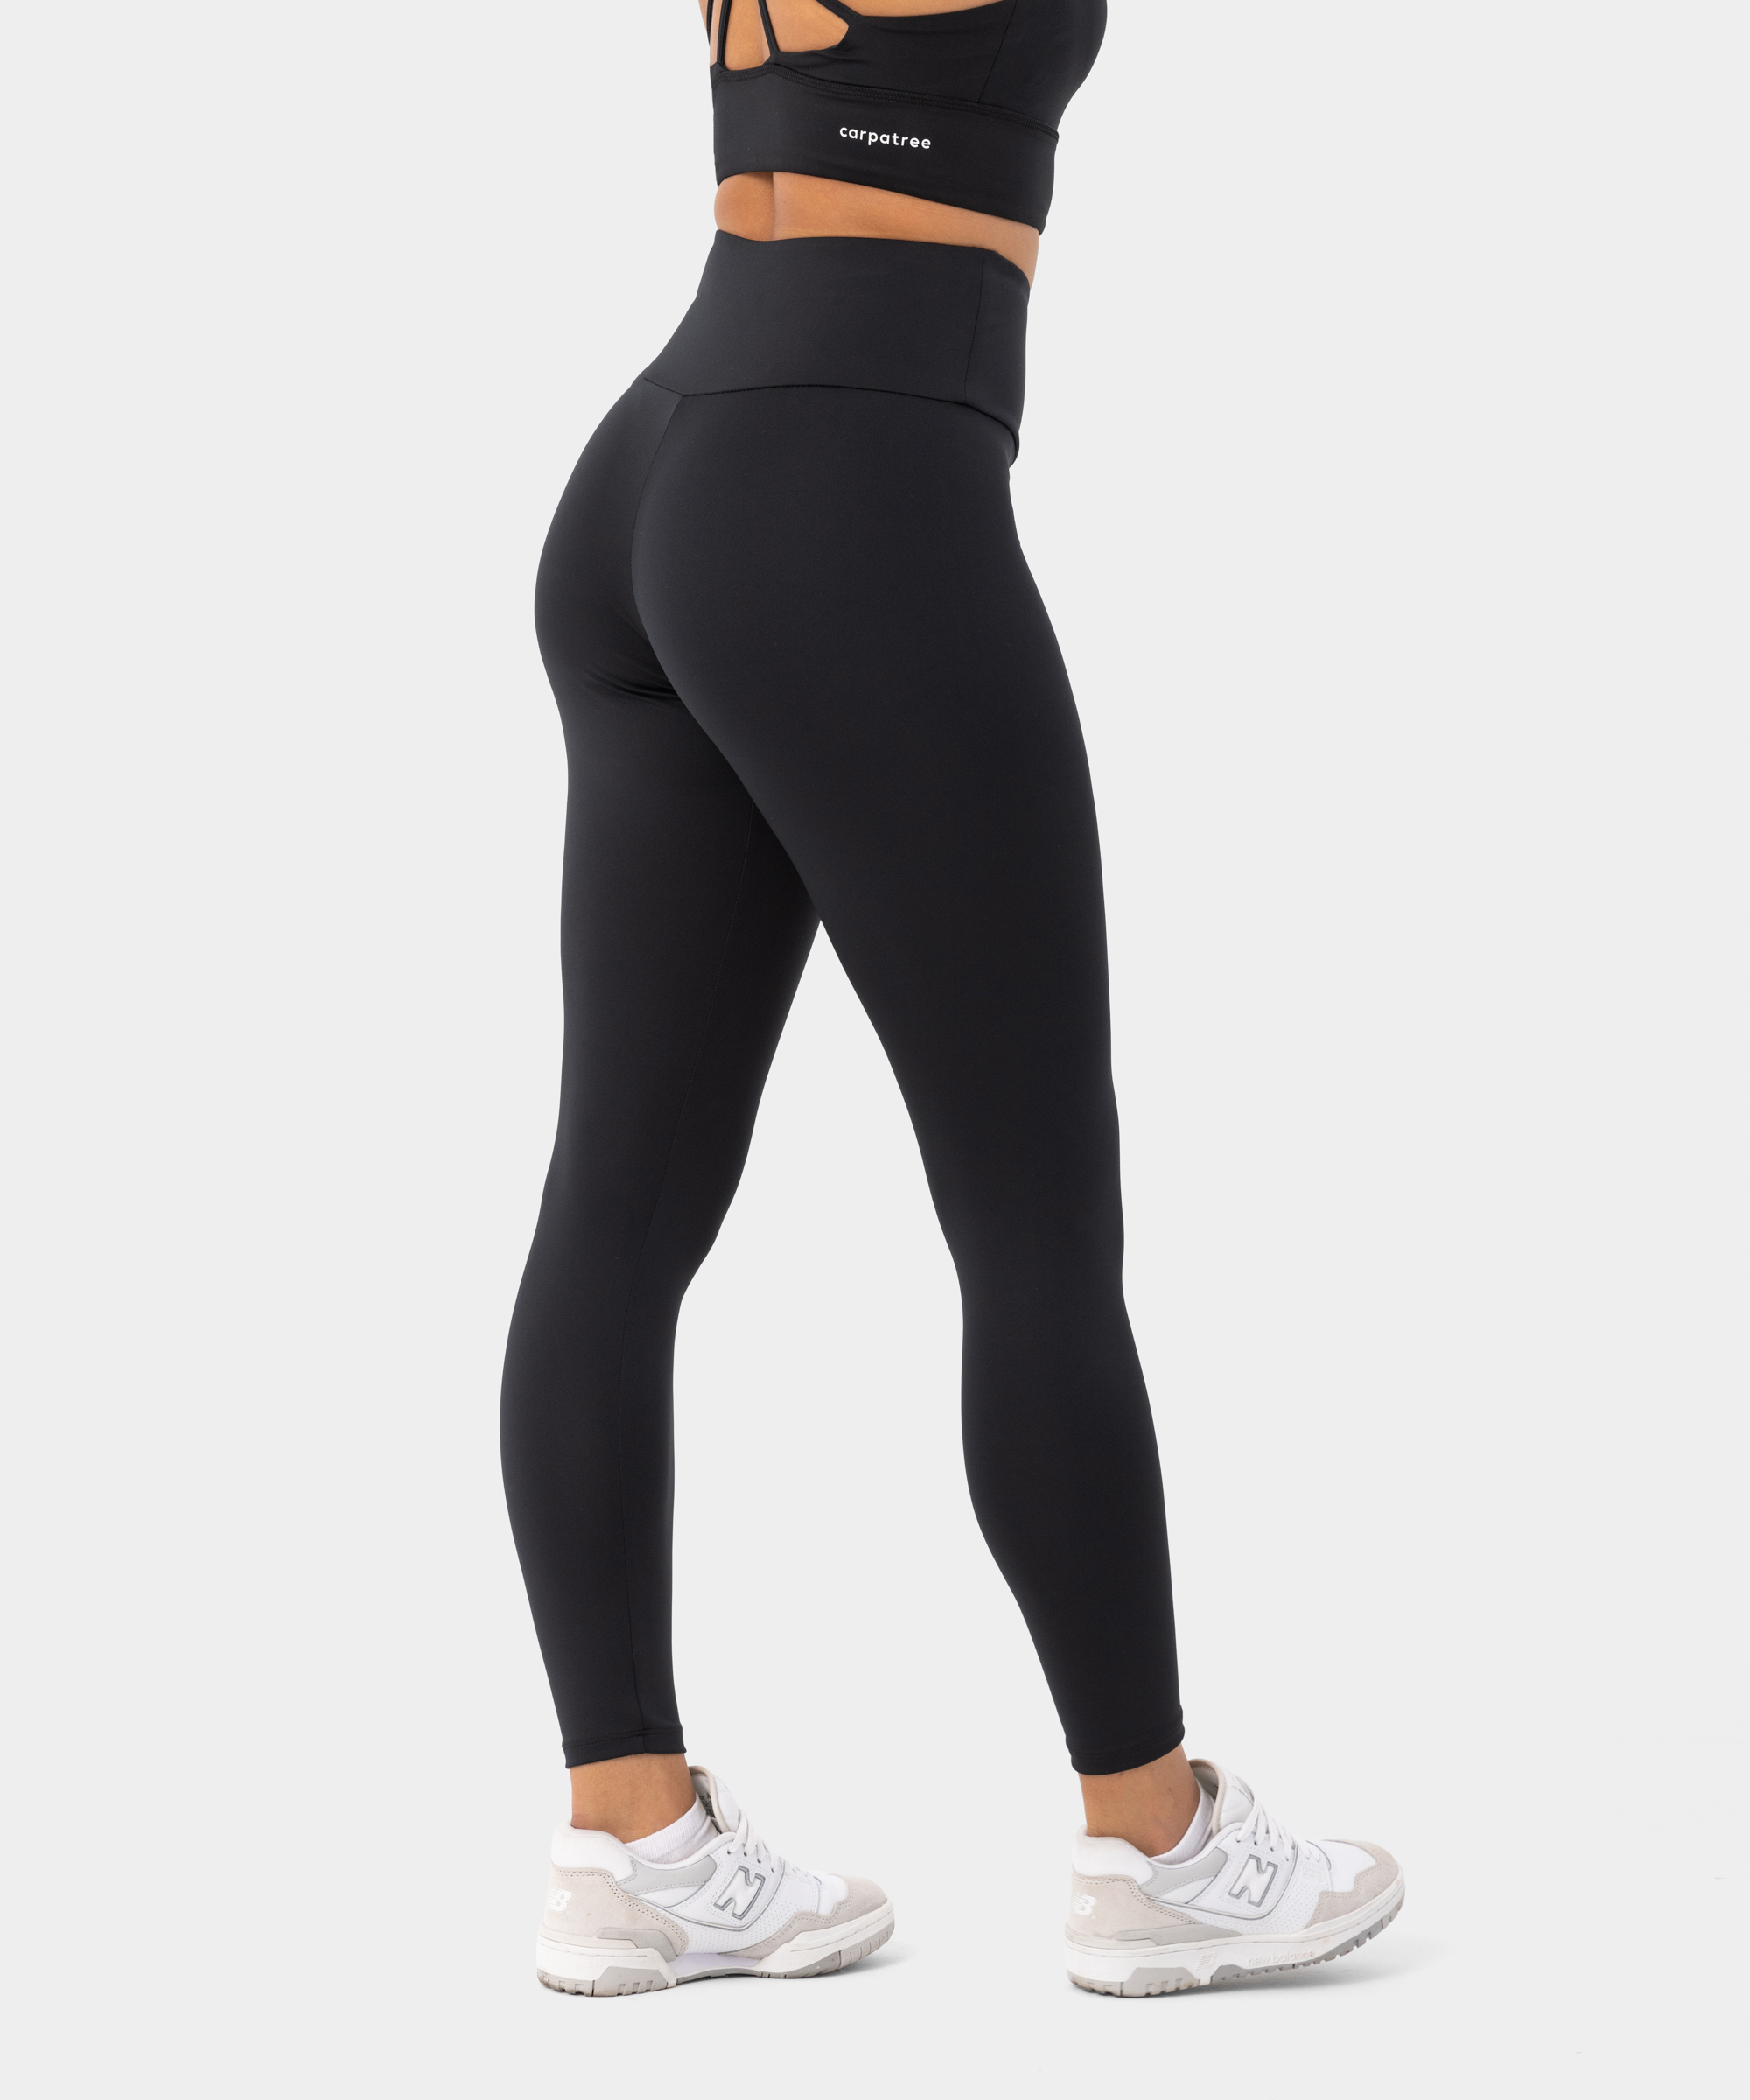 Aurora Leggings - Leopard  Athleisure outfits, Fit women, All black outfit